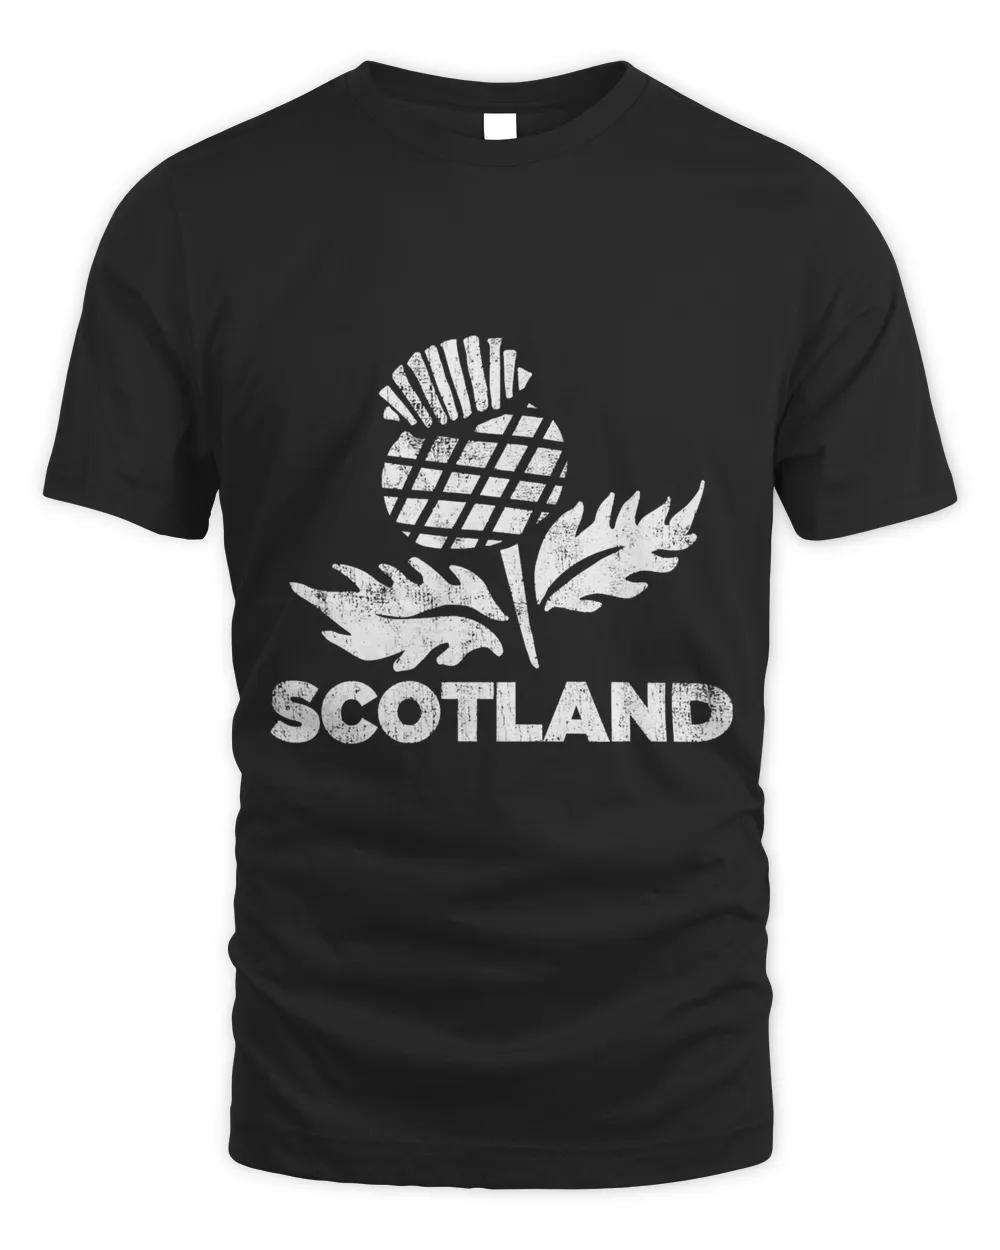 Retro Thistle Scottish Rugby  Scotland Rugby Football Top T-Shirt